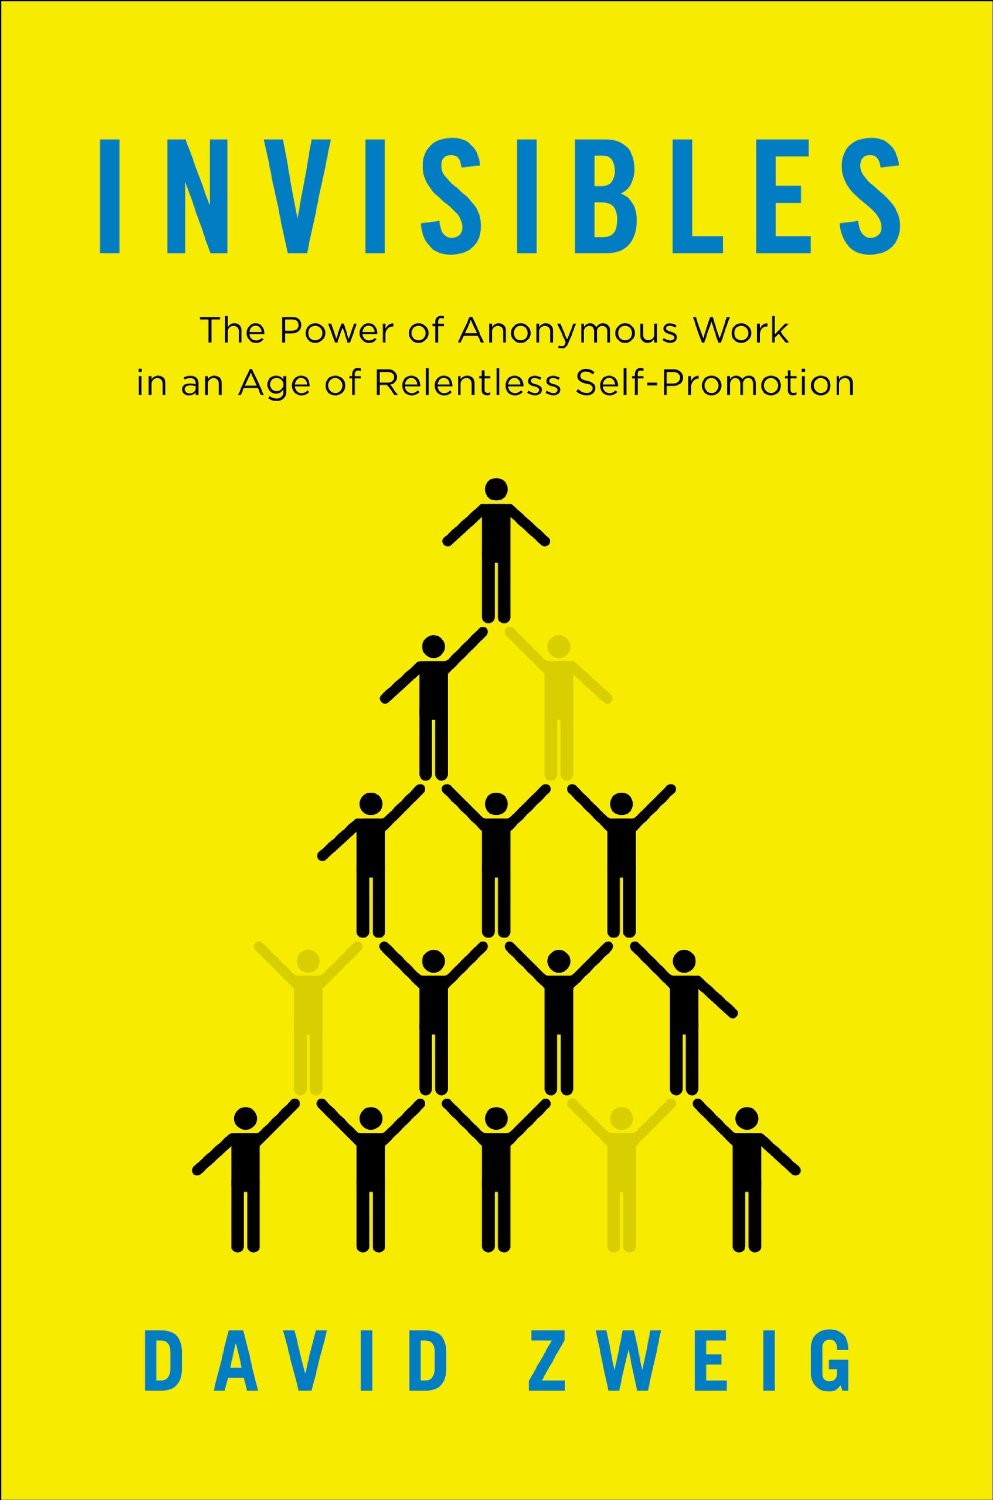 David Zweig's book Invisibles: The Power of Anonymous Work in an Age of Relentless Self-Promotion (Invisibles: The Power of Anonymous Work in an Age of Relentless Self-Promotion)